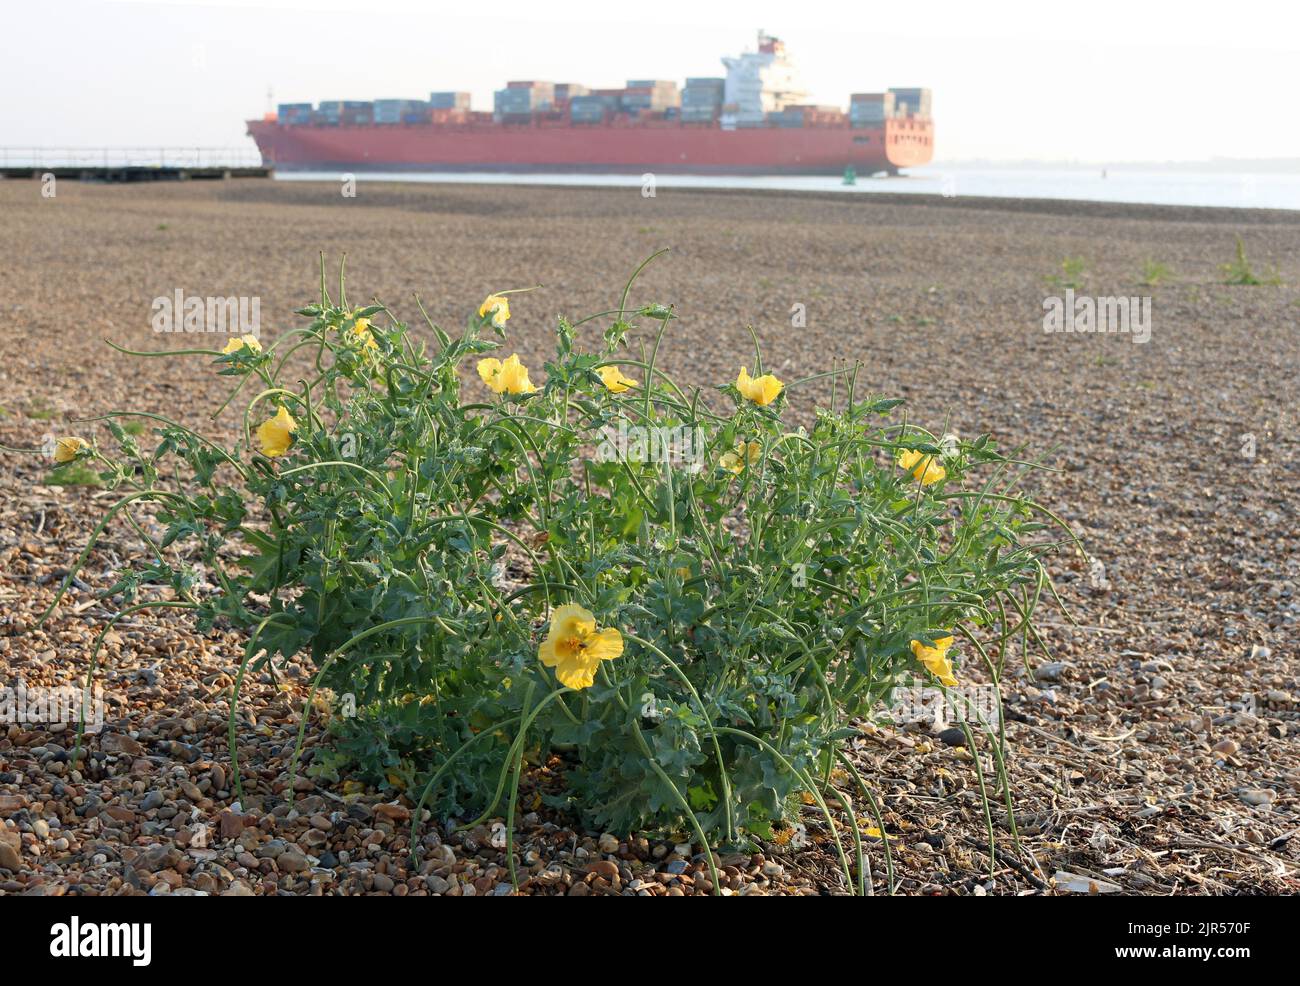 Yellow horned poppy, Glaucium flavum, plant with flowers and seed pods on a shingle beach of small pebbles and a container ship blurred in the backgro Stock Photo